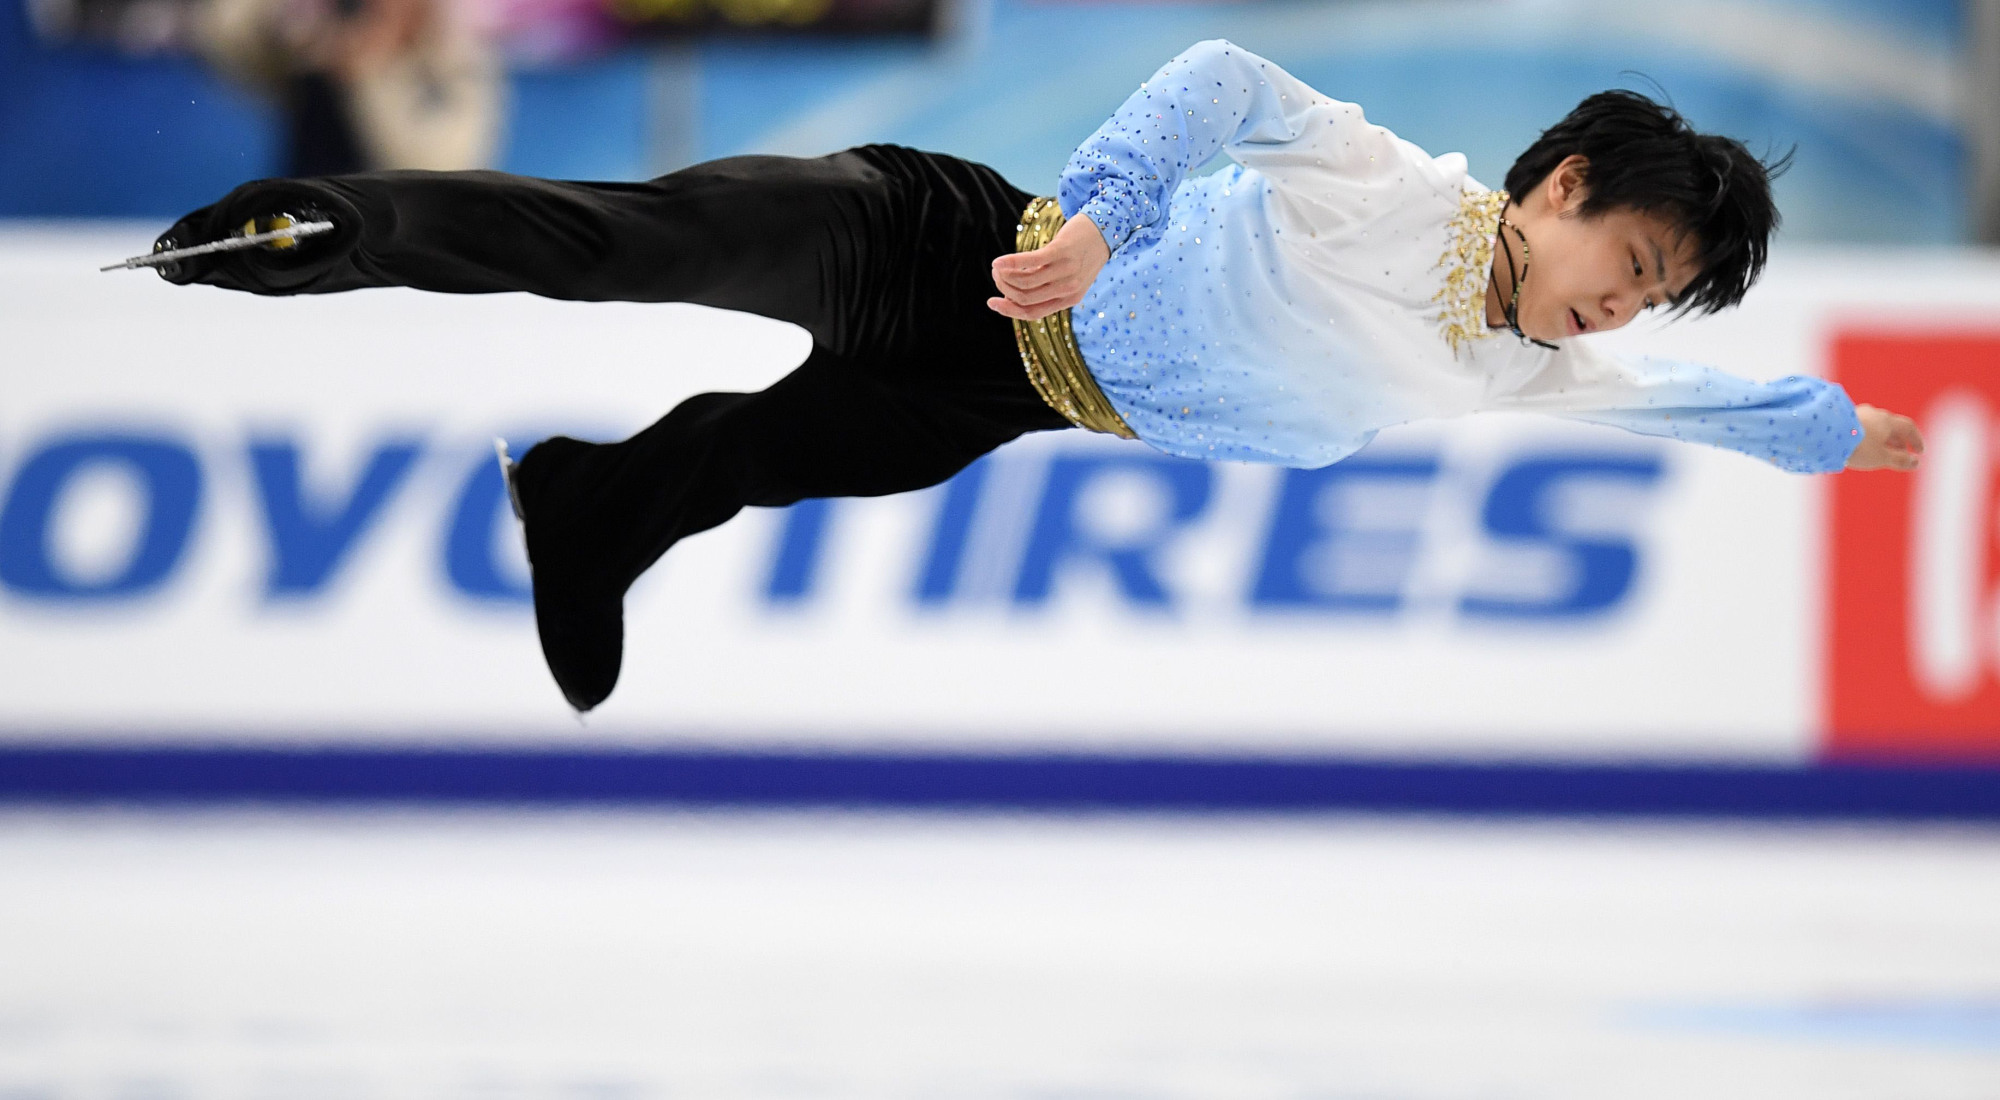 Yuzuru Hanyu competes in the short program at the Cup of Russia in Moscow on Friday night. Hanyu was in second place going into Saturday's free skate. | AFP-JIJI